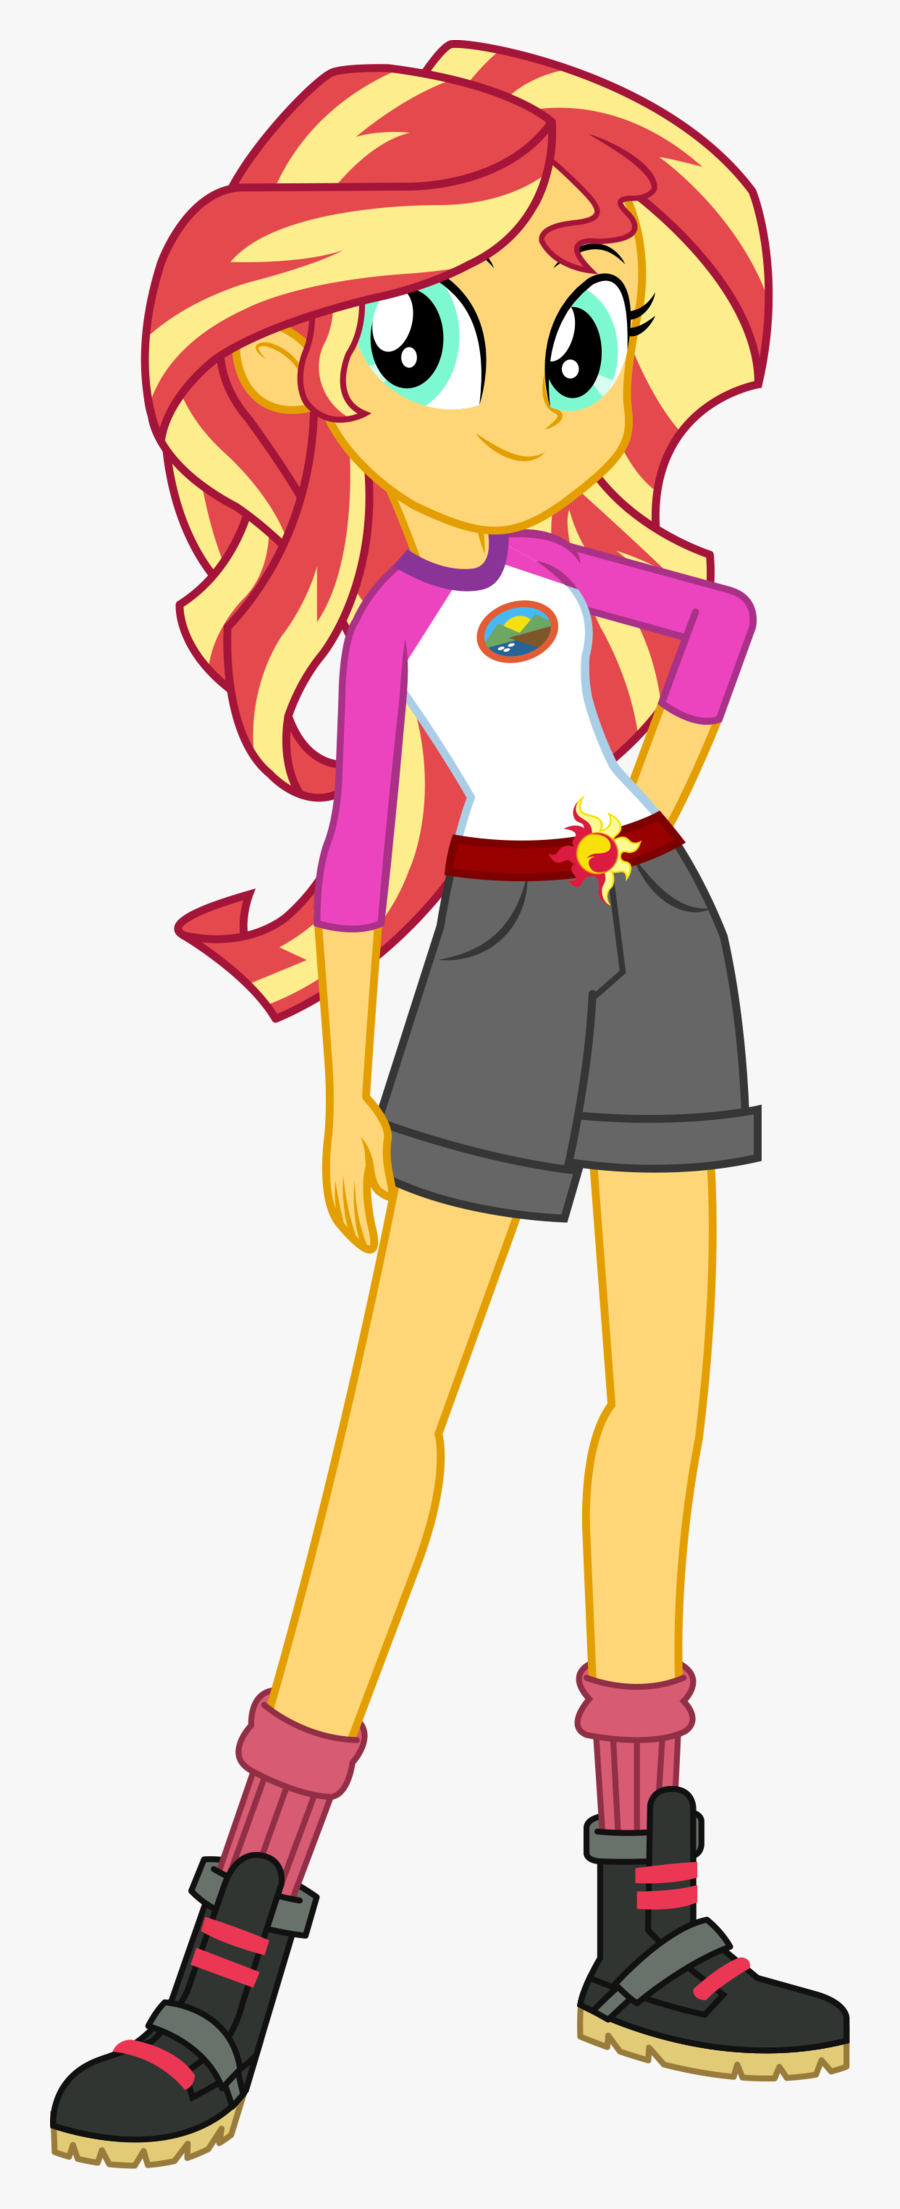 Legend Of Everfree Geometric Pinkie Pie Vector By Icantunloveyou - My Little Pony Equestria Girls Legend Of Everfree Sunset, Transparent Clipart